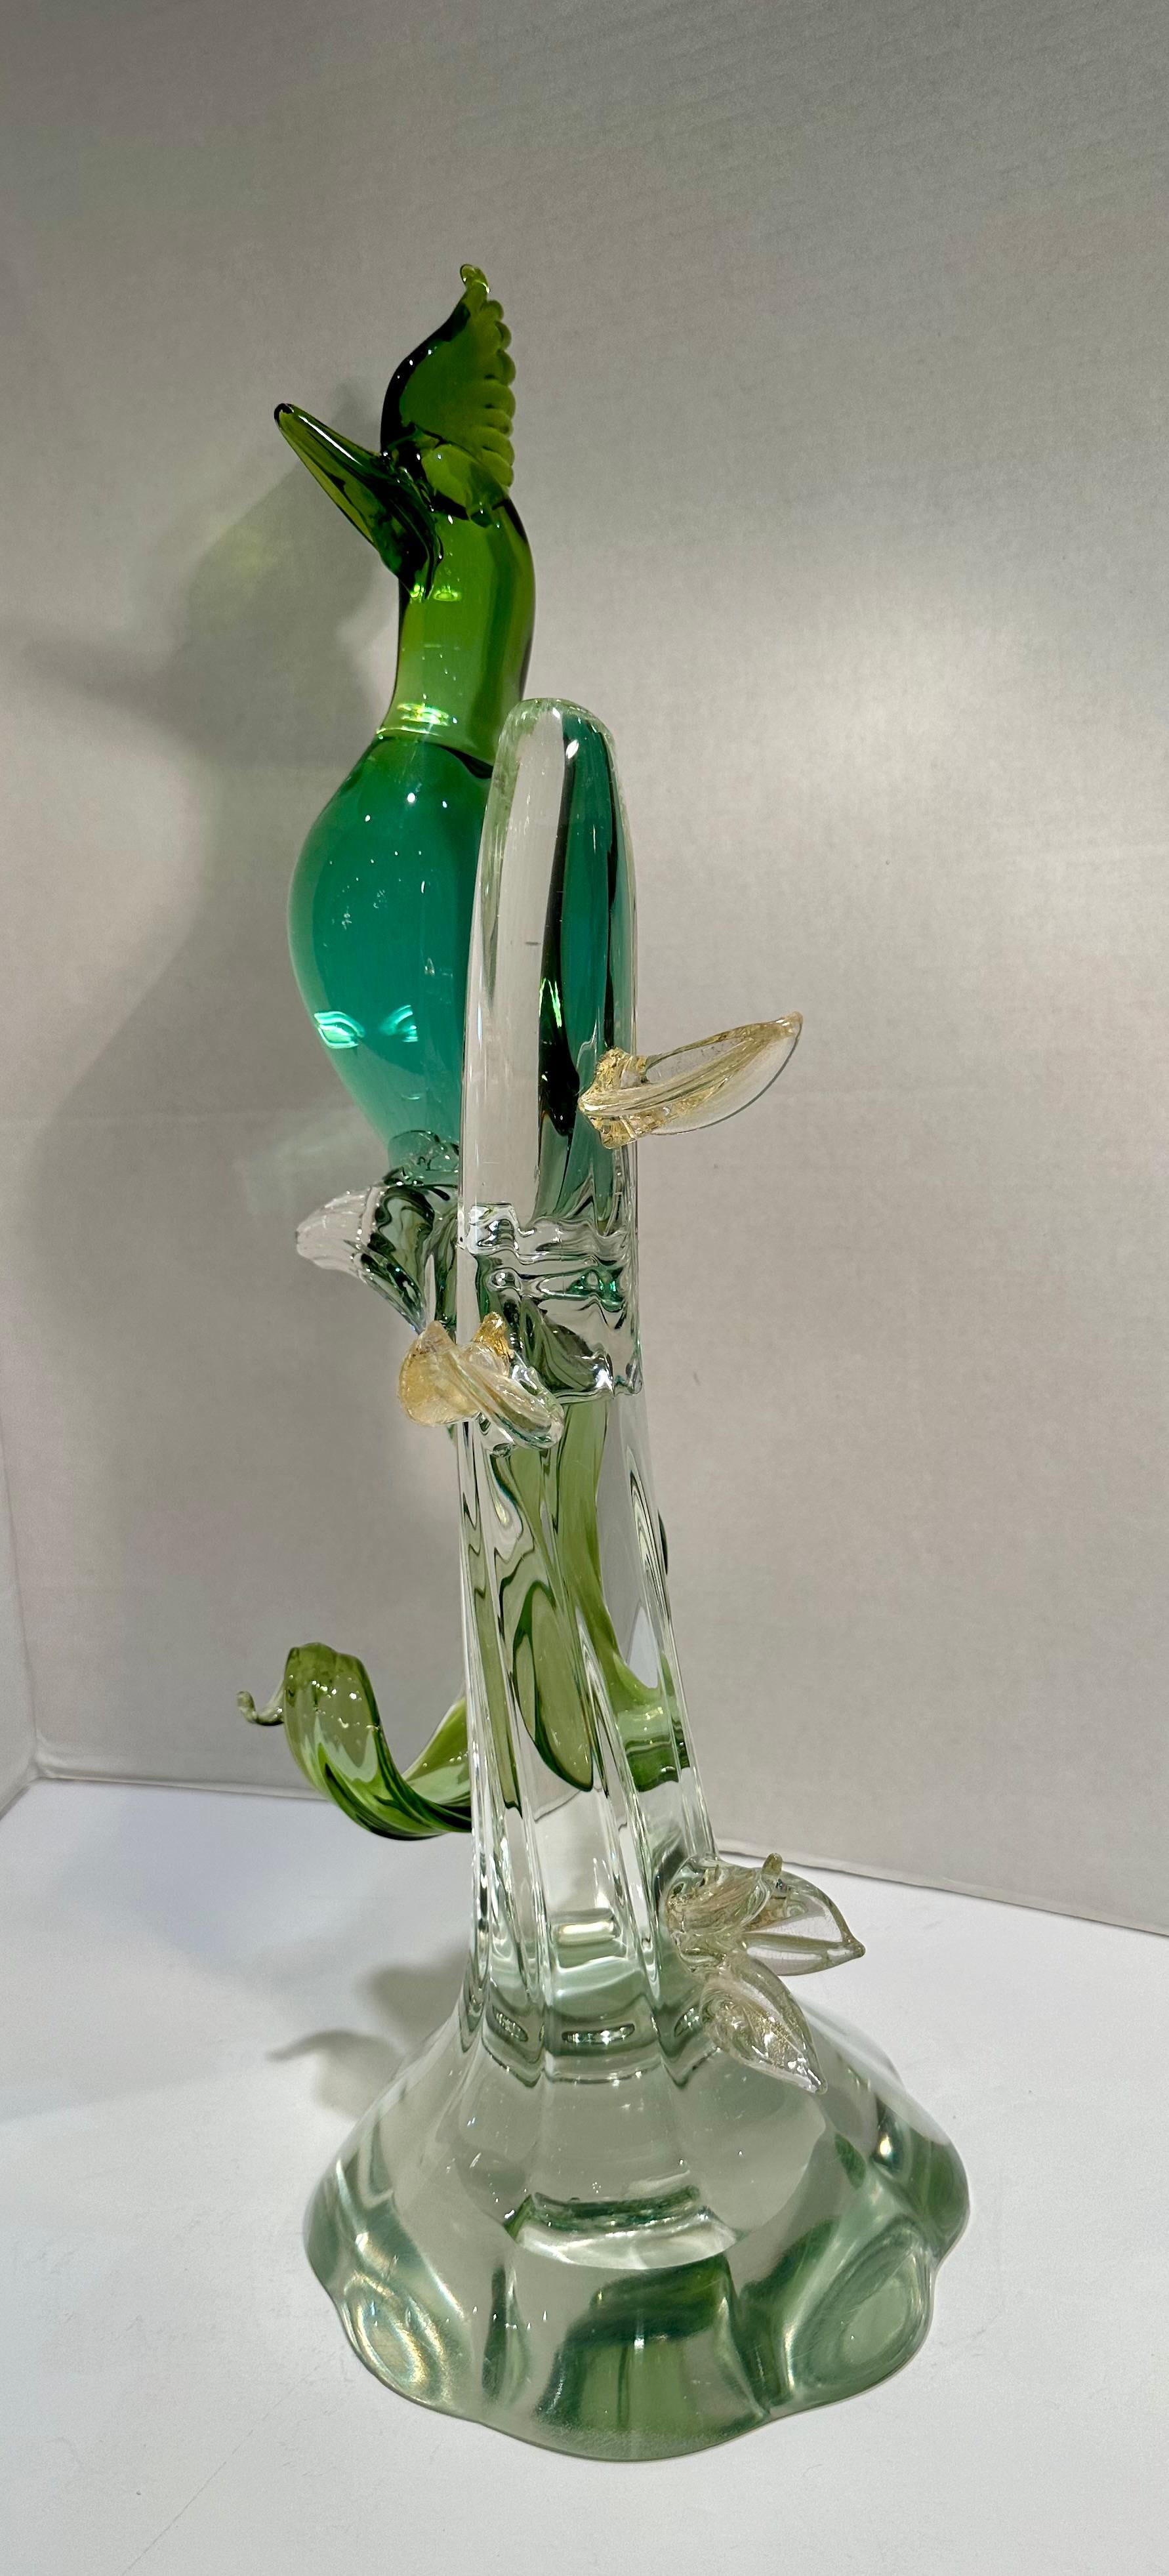  Large Salviati Italy Murano Glass Exotic Bird Figurine in Shades of Green  For Sale 3